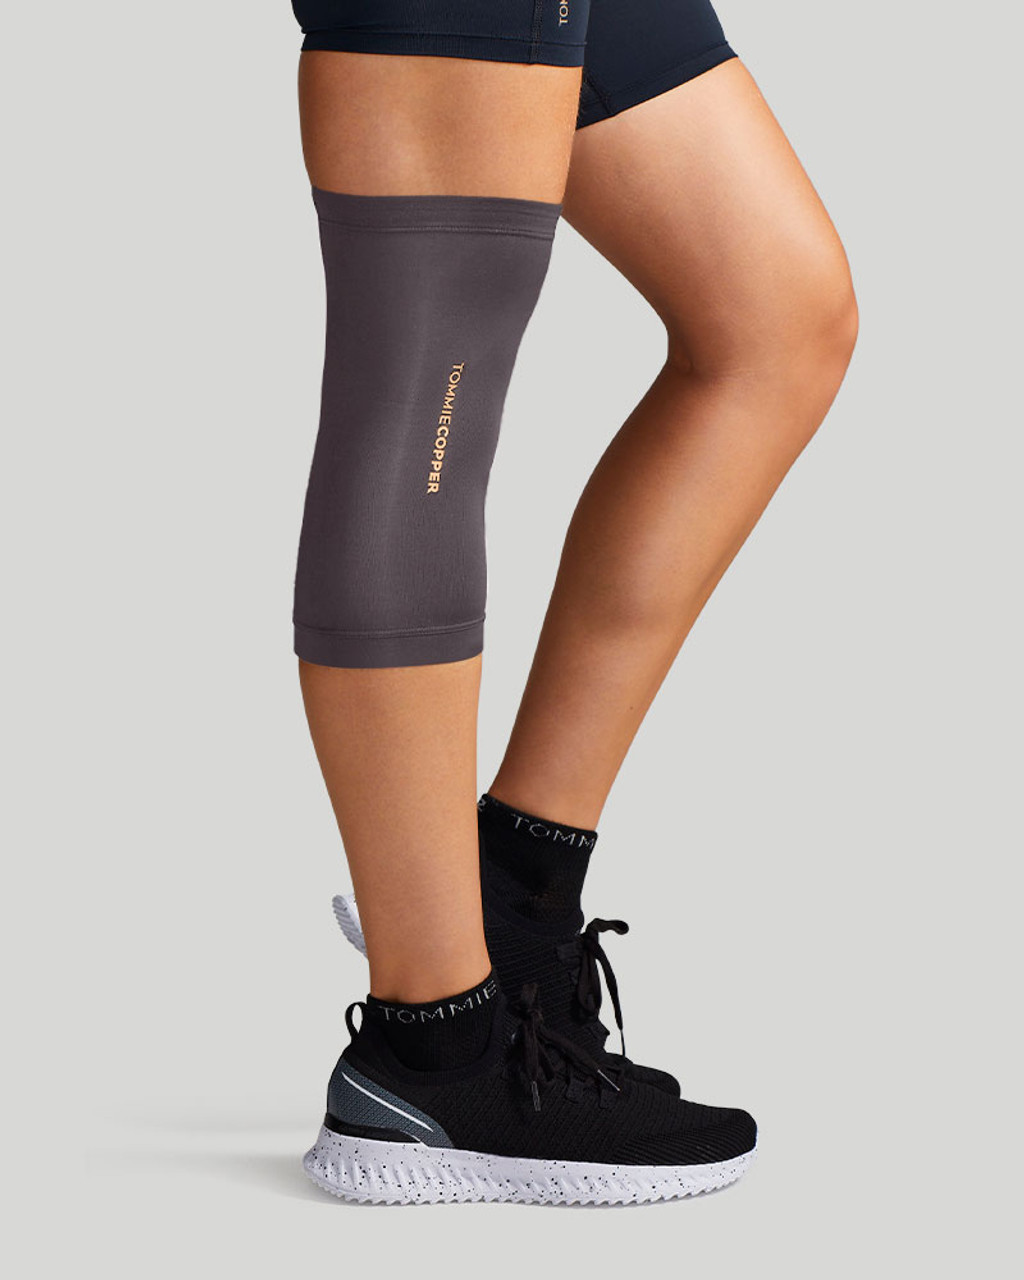 Buy the Tommie Copper® Women's Core Compression Knee Sleeve